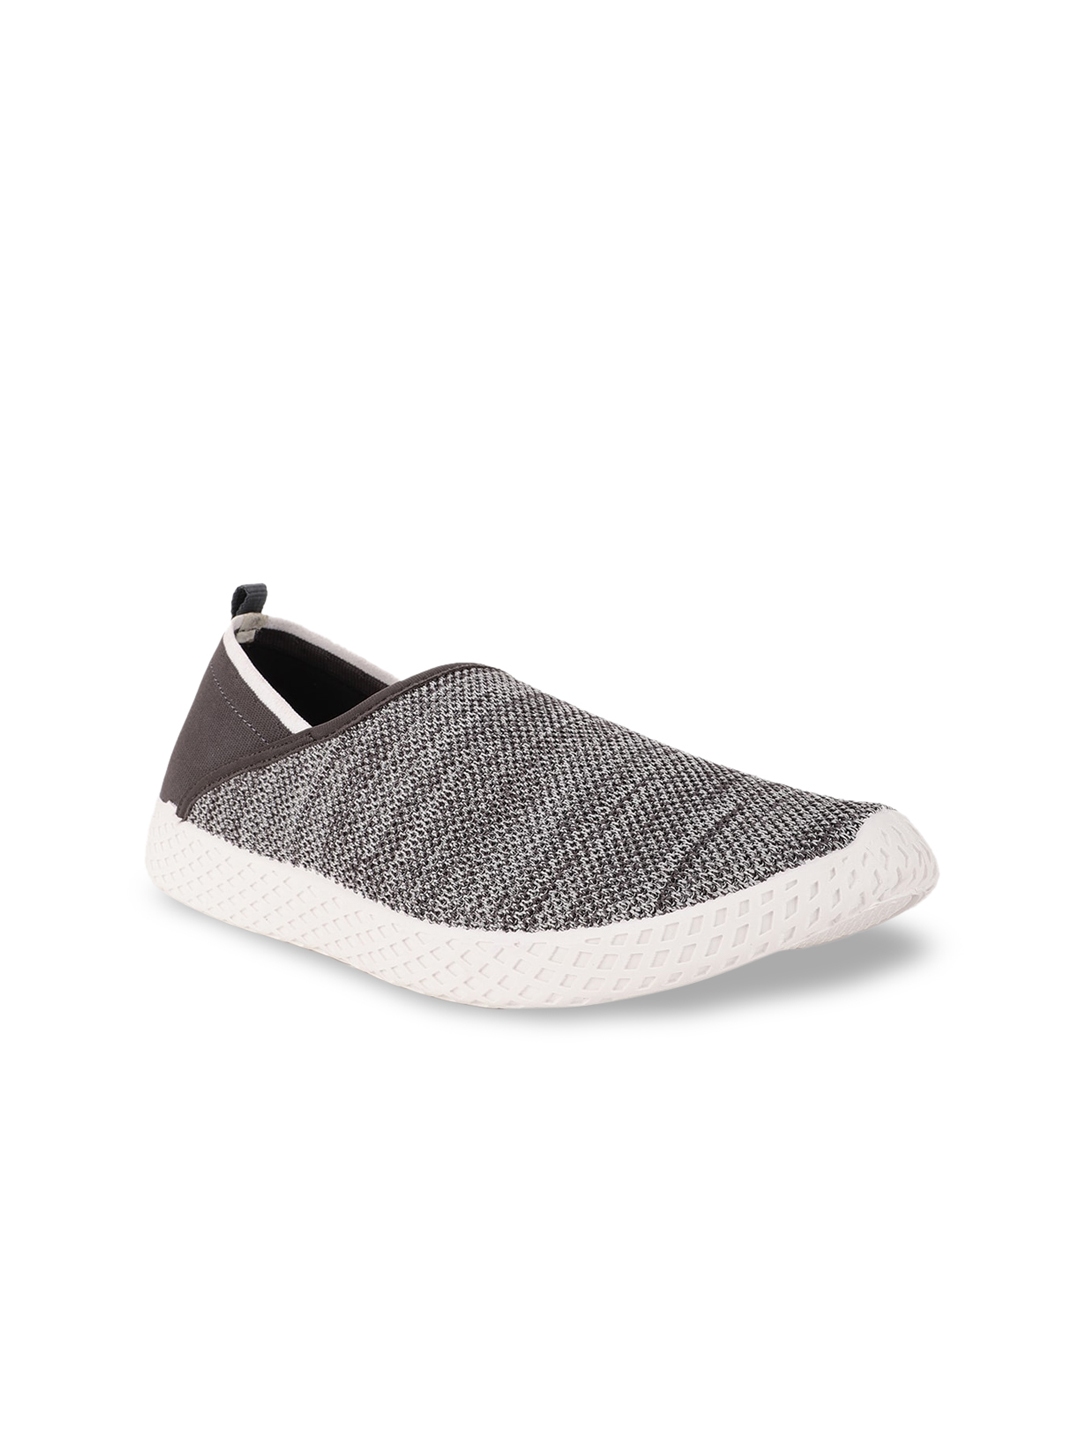 Buy Bata Women Grey Woven Design Slip On Sneakers - Casual Shoes for ...